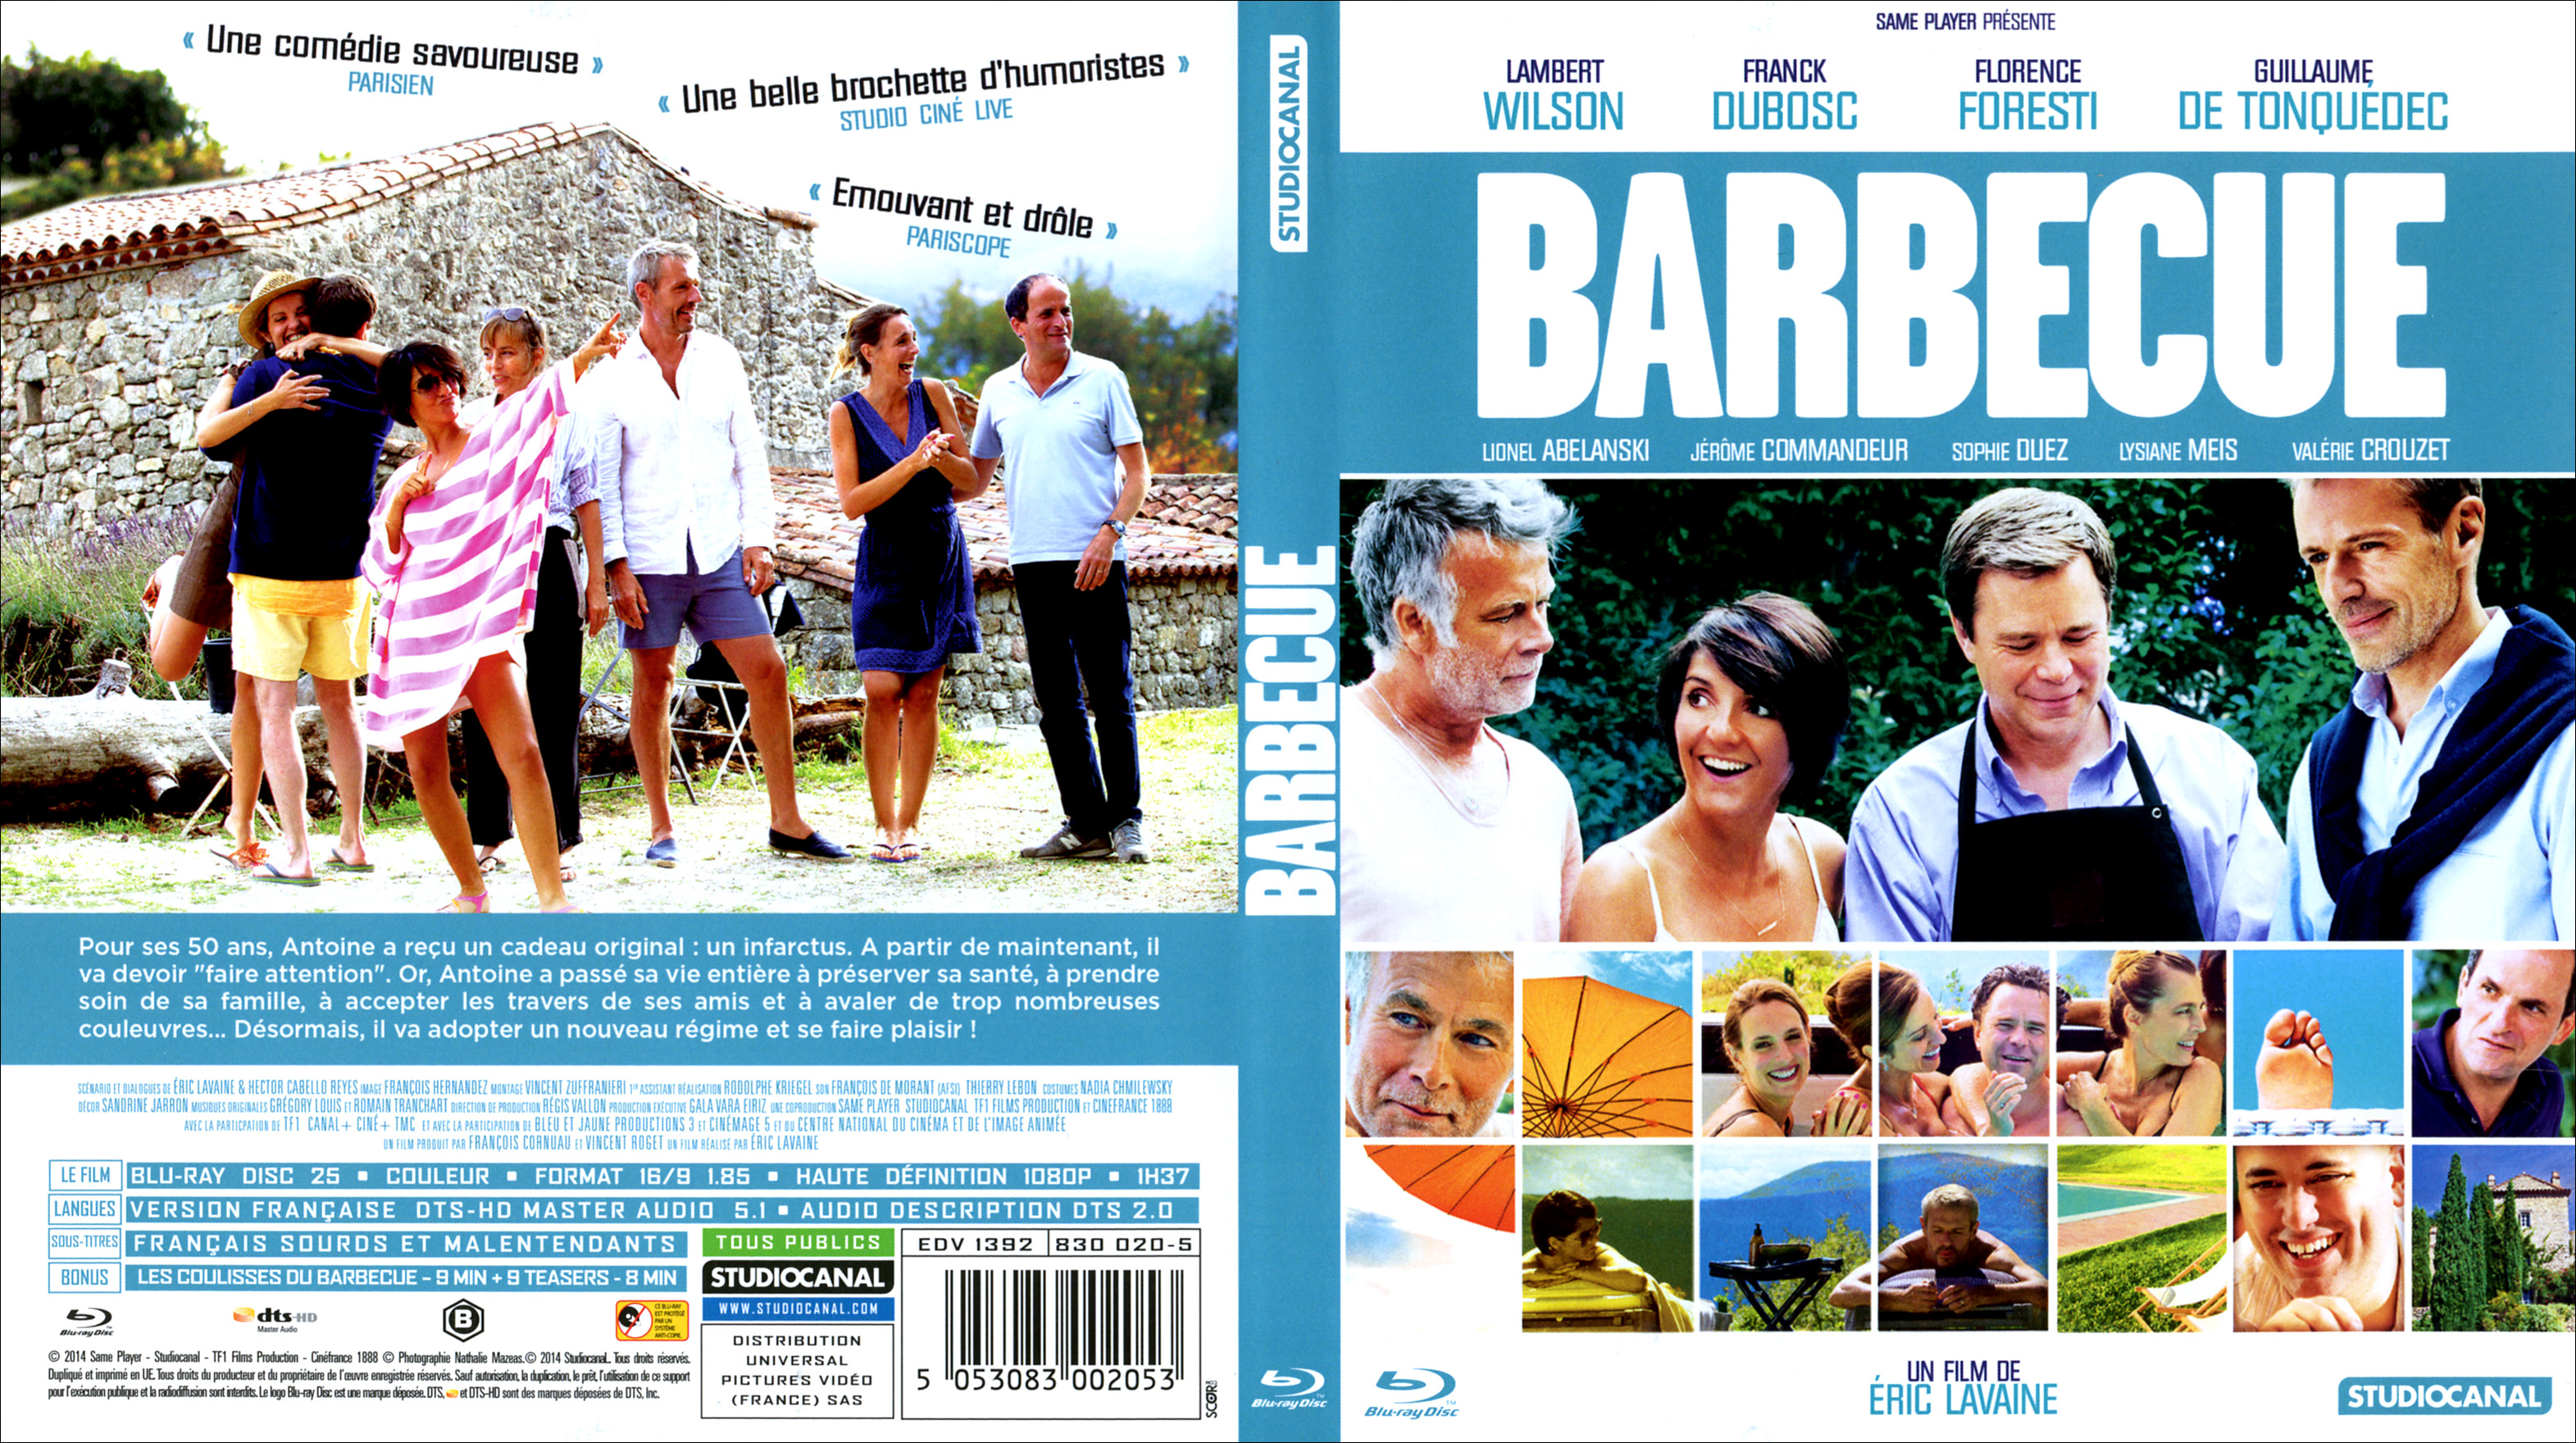 Jaquette DVD Barbecue (BLU-RAY)